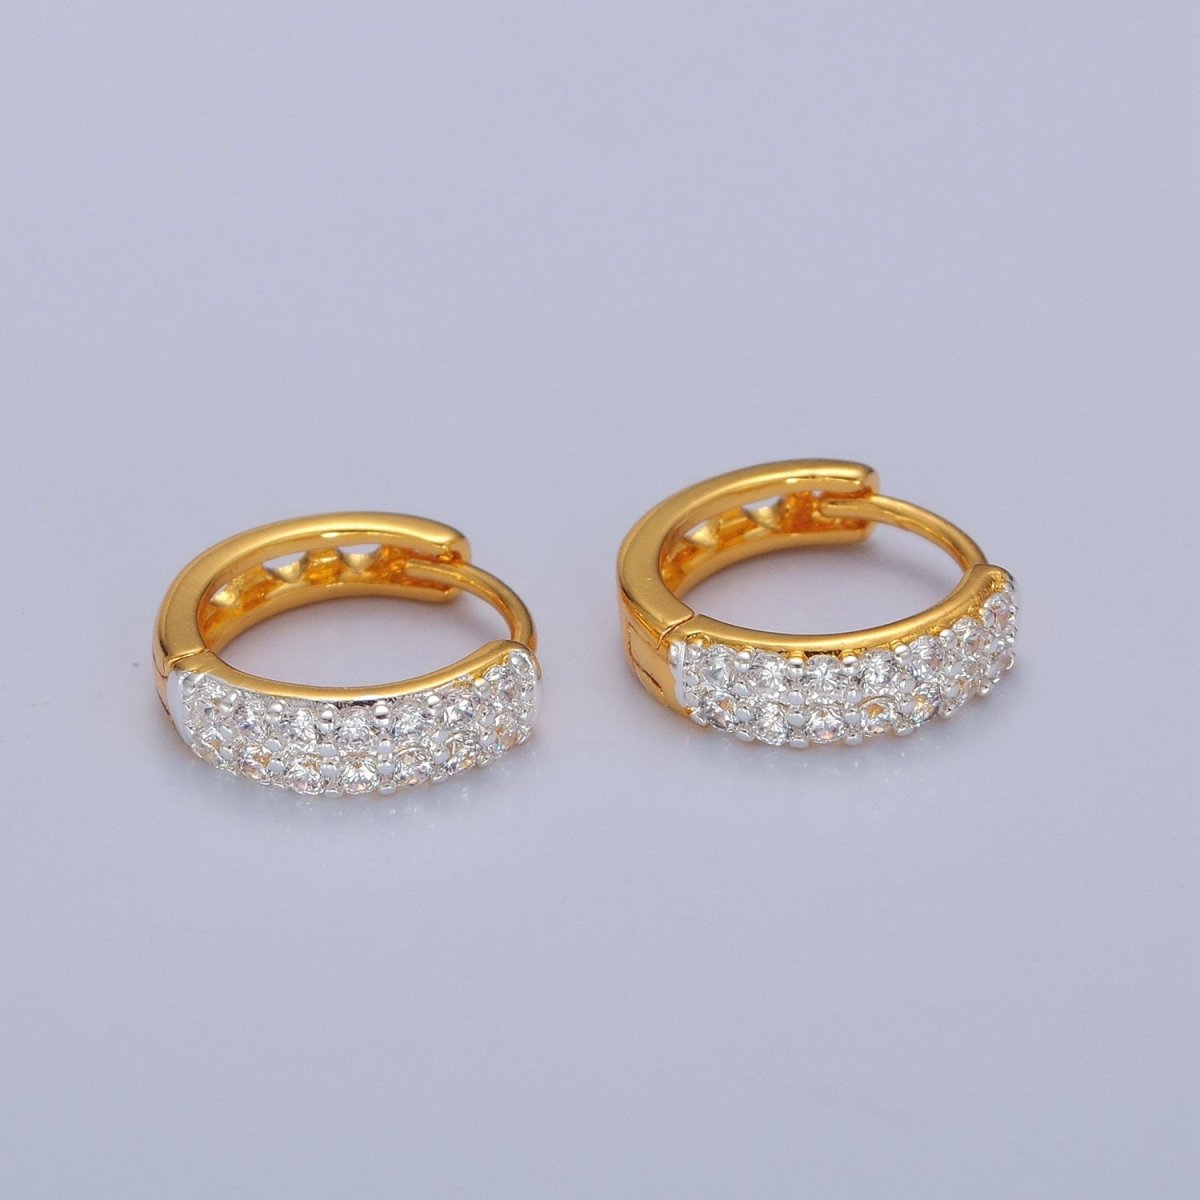 24K Gold Filled CZ Hoop Earrings Small Lever Back Huggie Hoop Earrings-Dainty CZ Earrings T-455 - DLUXCA